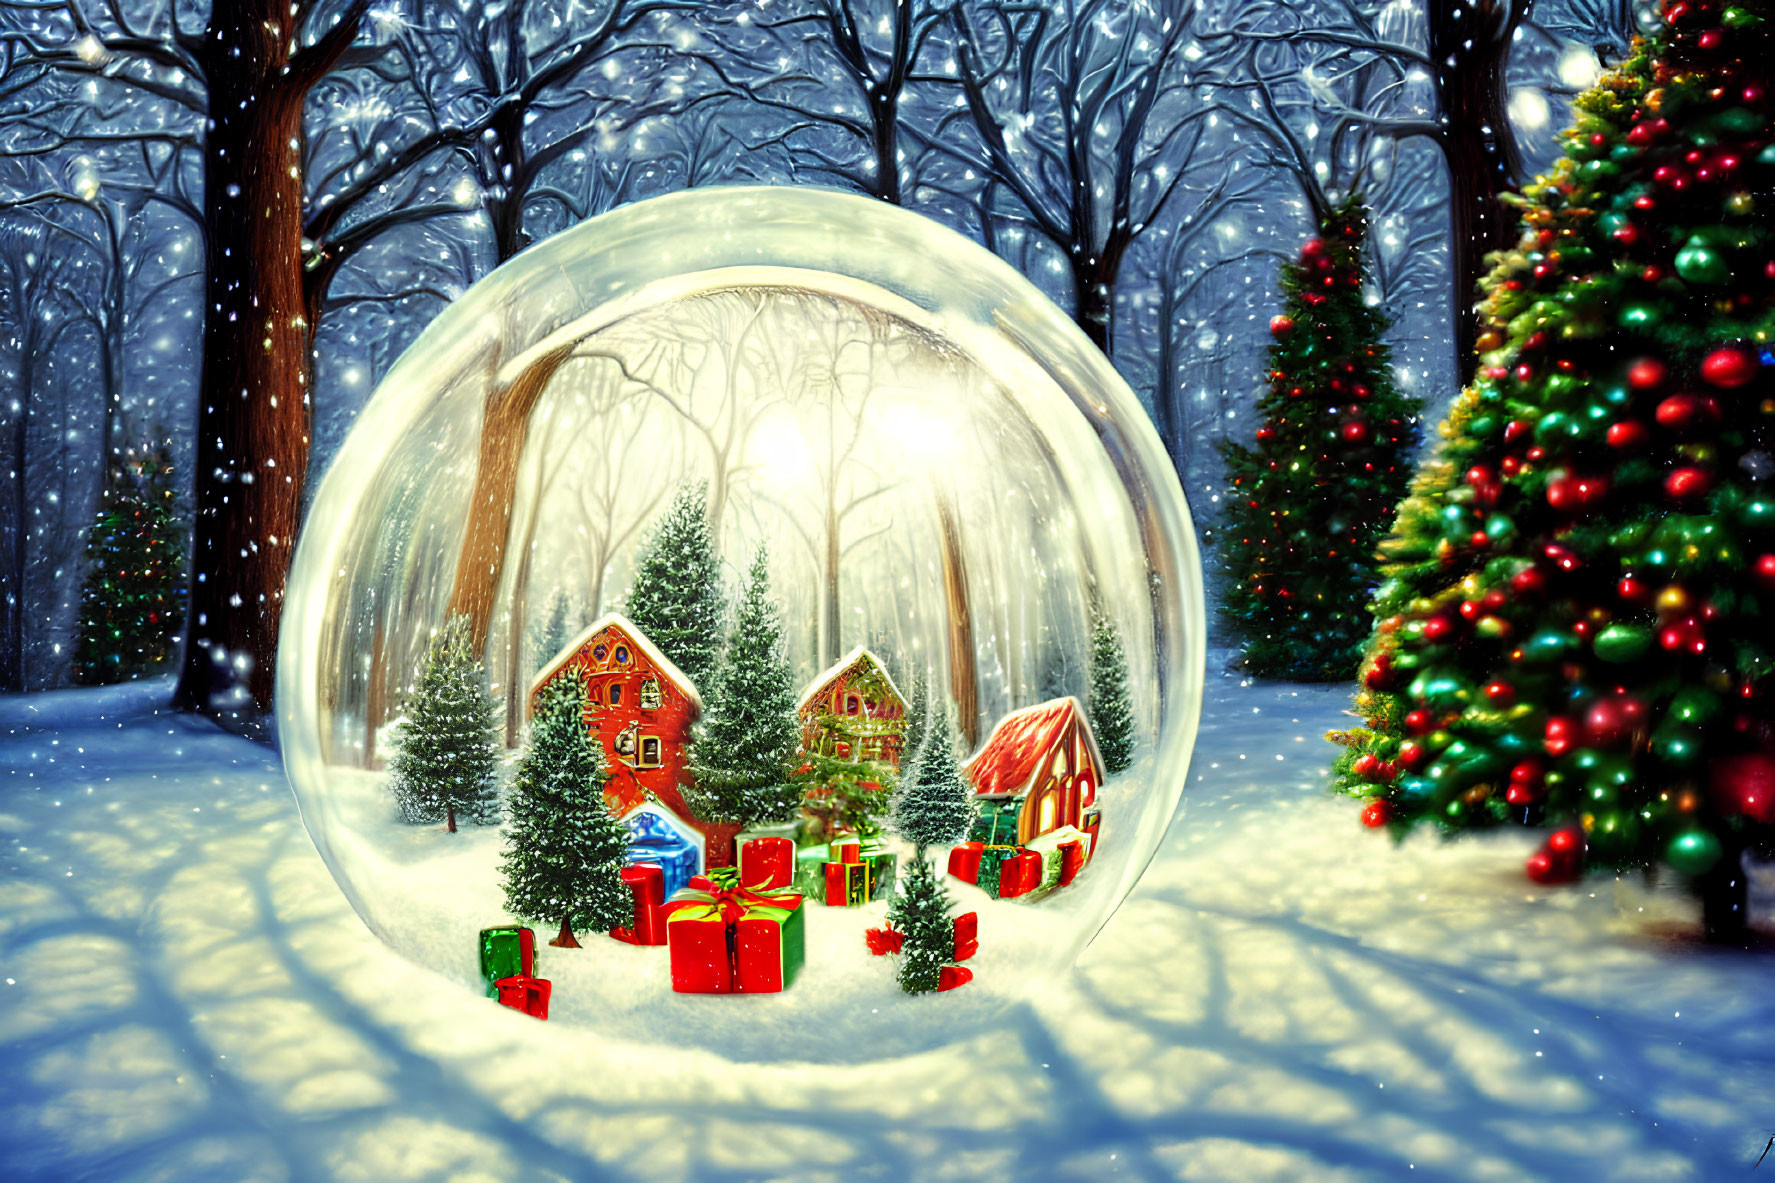 Detailed Snow Globe Scene with Miniature Houses and Christmas Tree